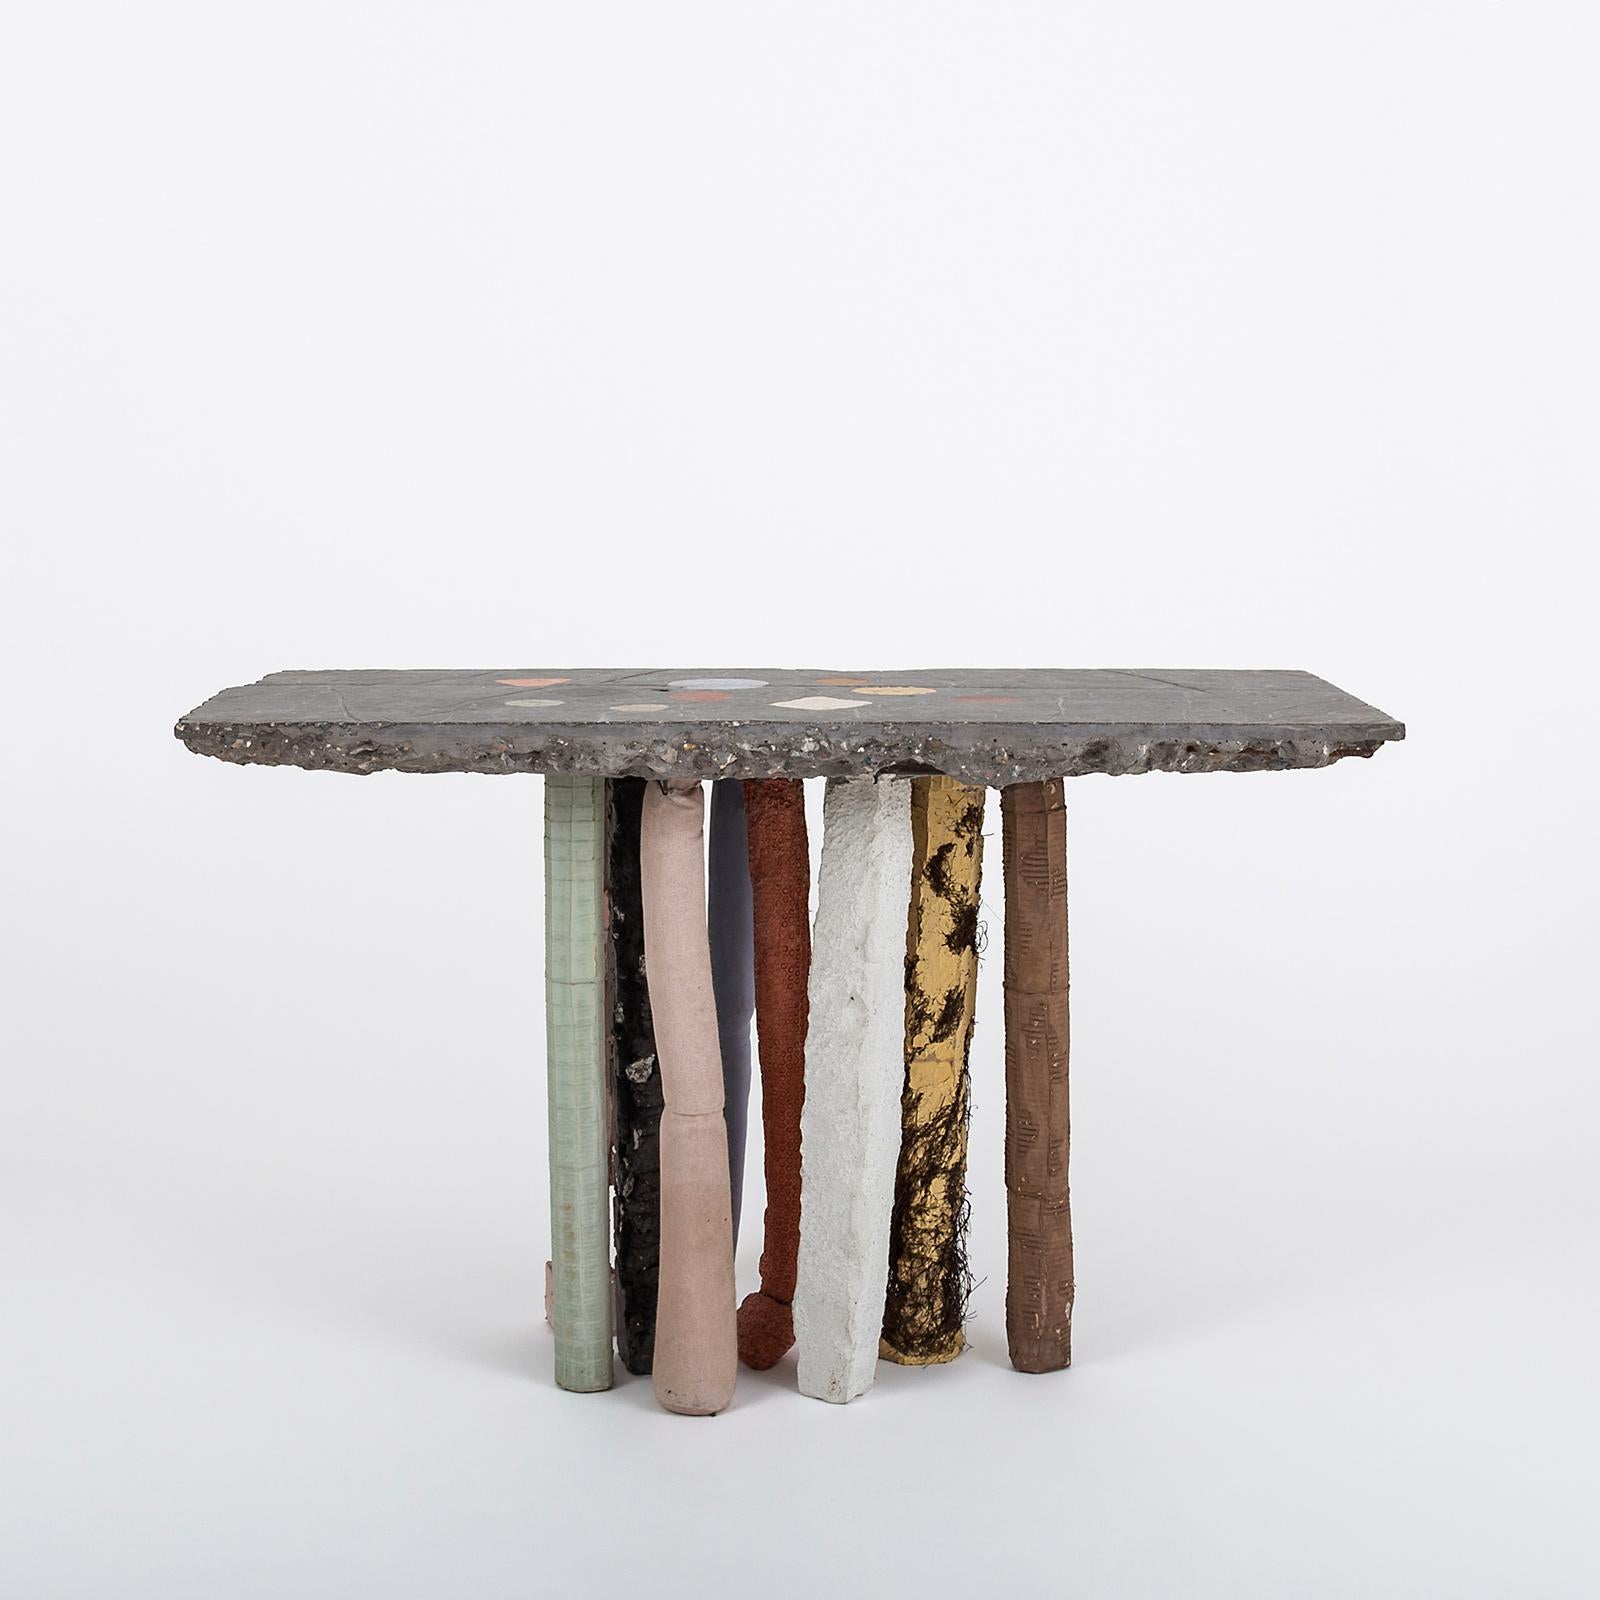 The Fossil console is a part of the Fossil collection by Nacho Carbonell. Alike the description of a Fossil: preserved remains of animals, plants and organisms from the remote past, Nacho had been collecting, gather and picking up materials from